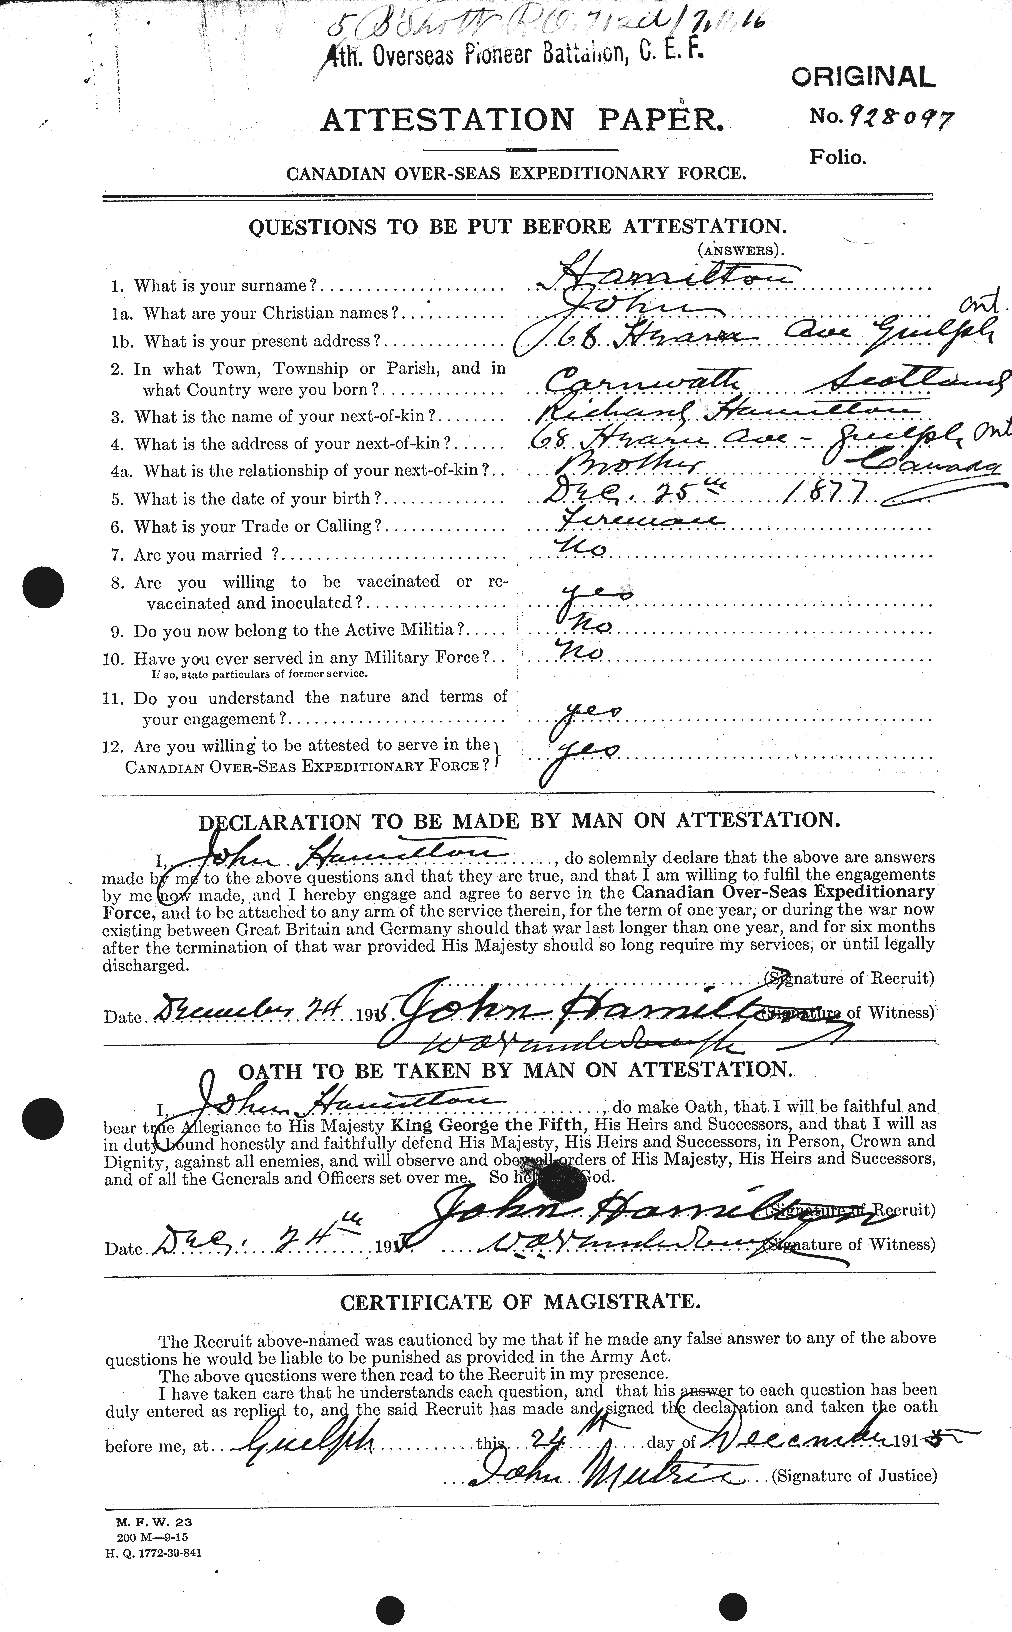 Personnel Records of the First World War - CEF 373050a